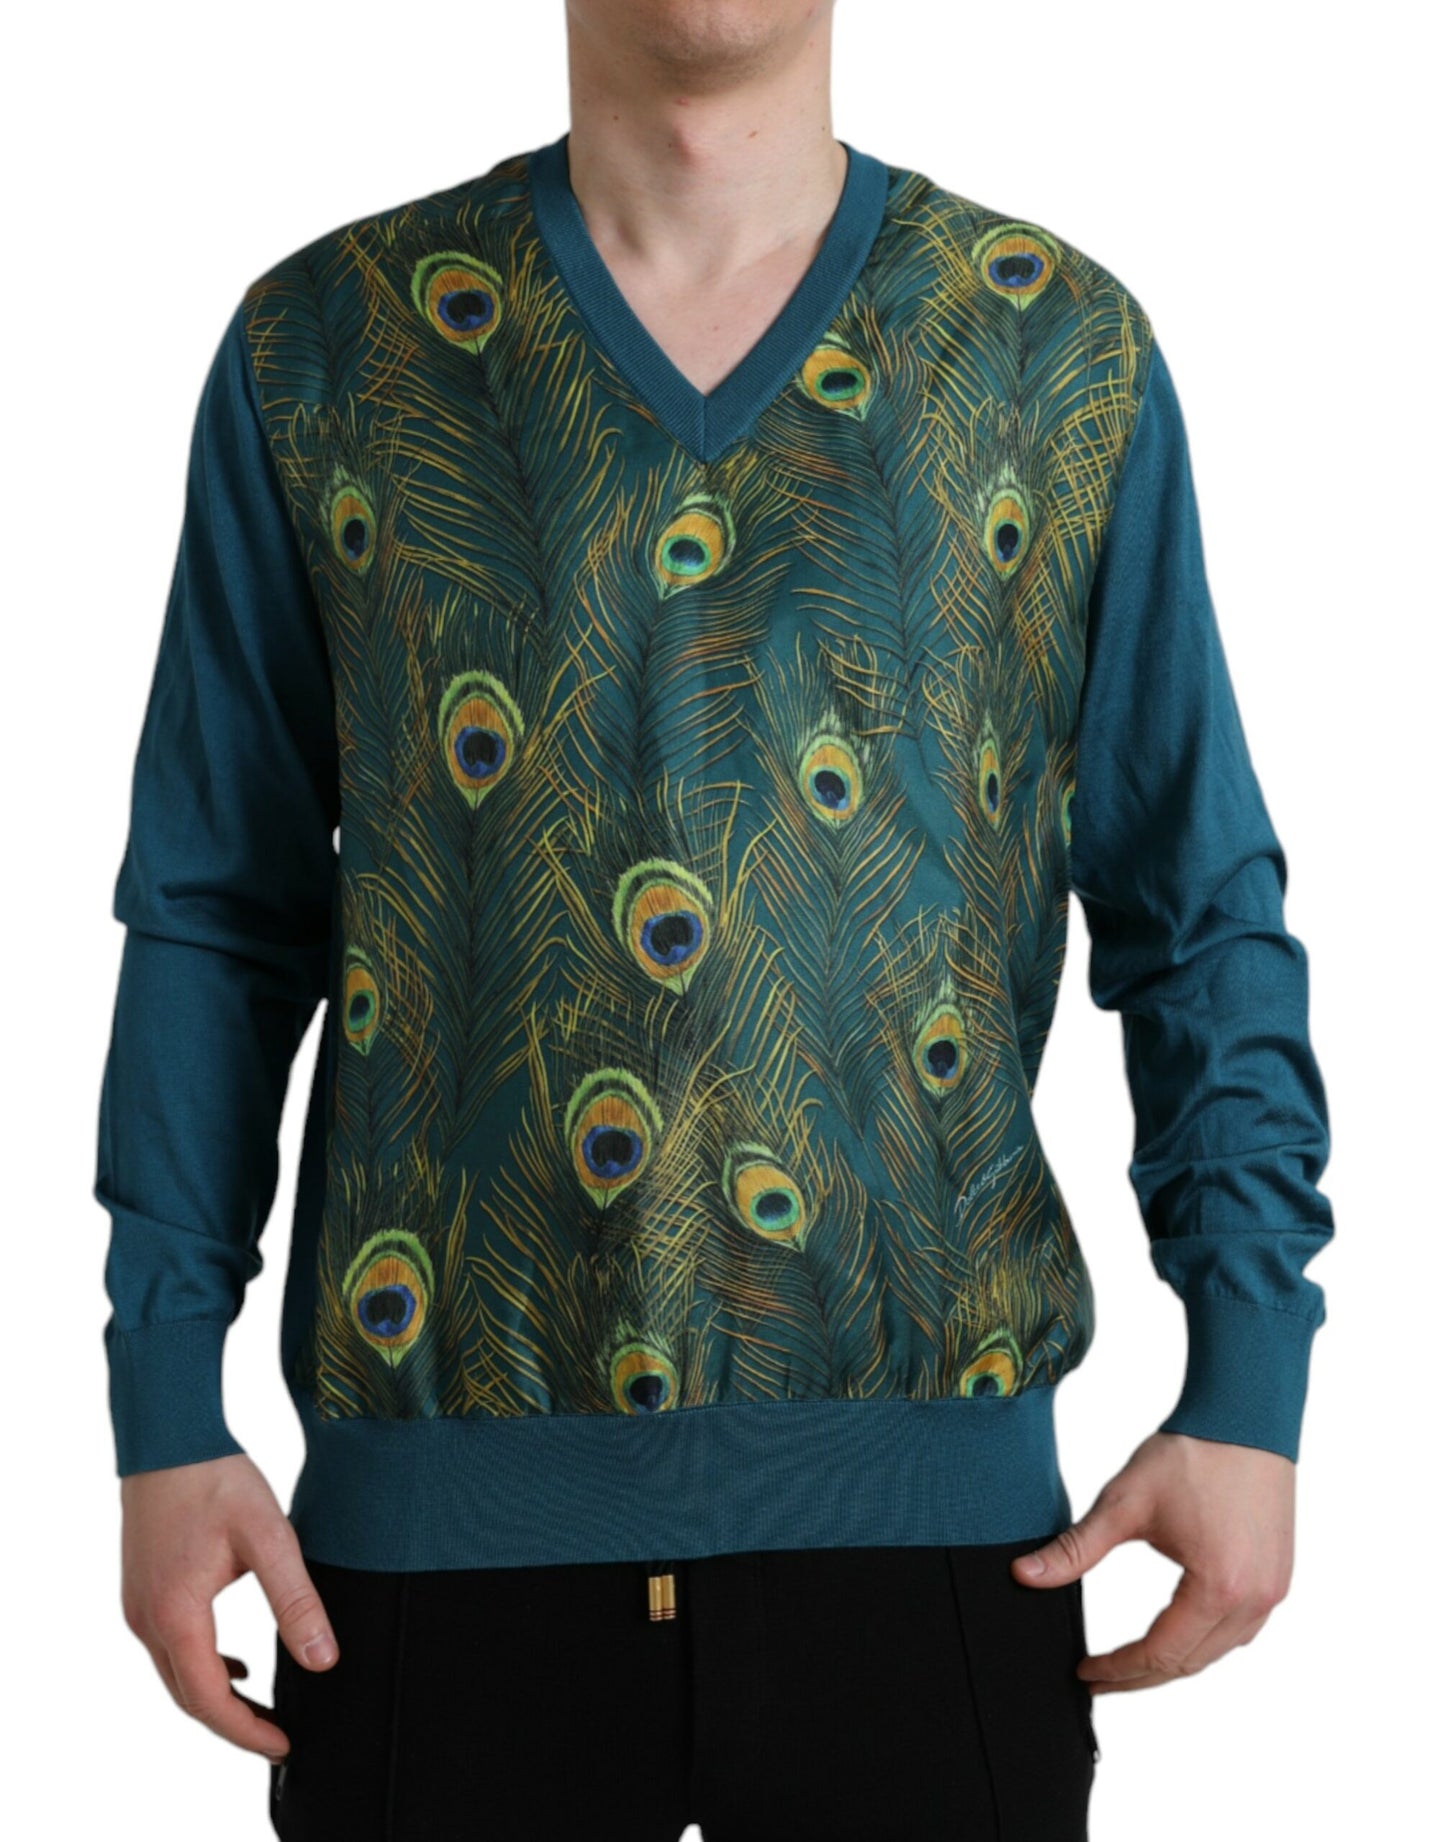 Silk V-Neck Peacock Feather Sweater